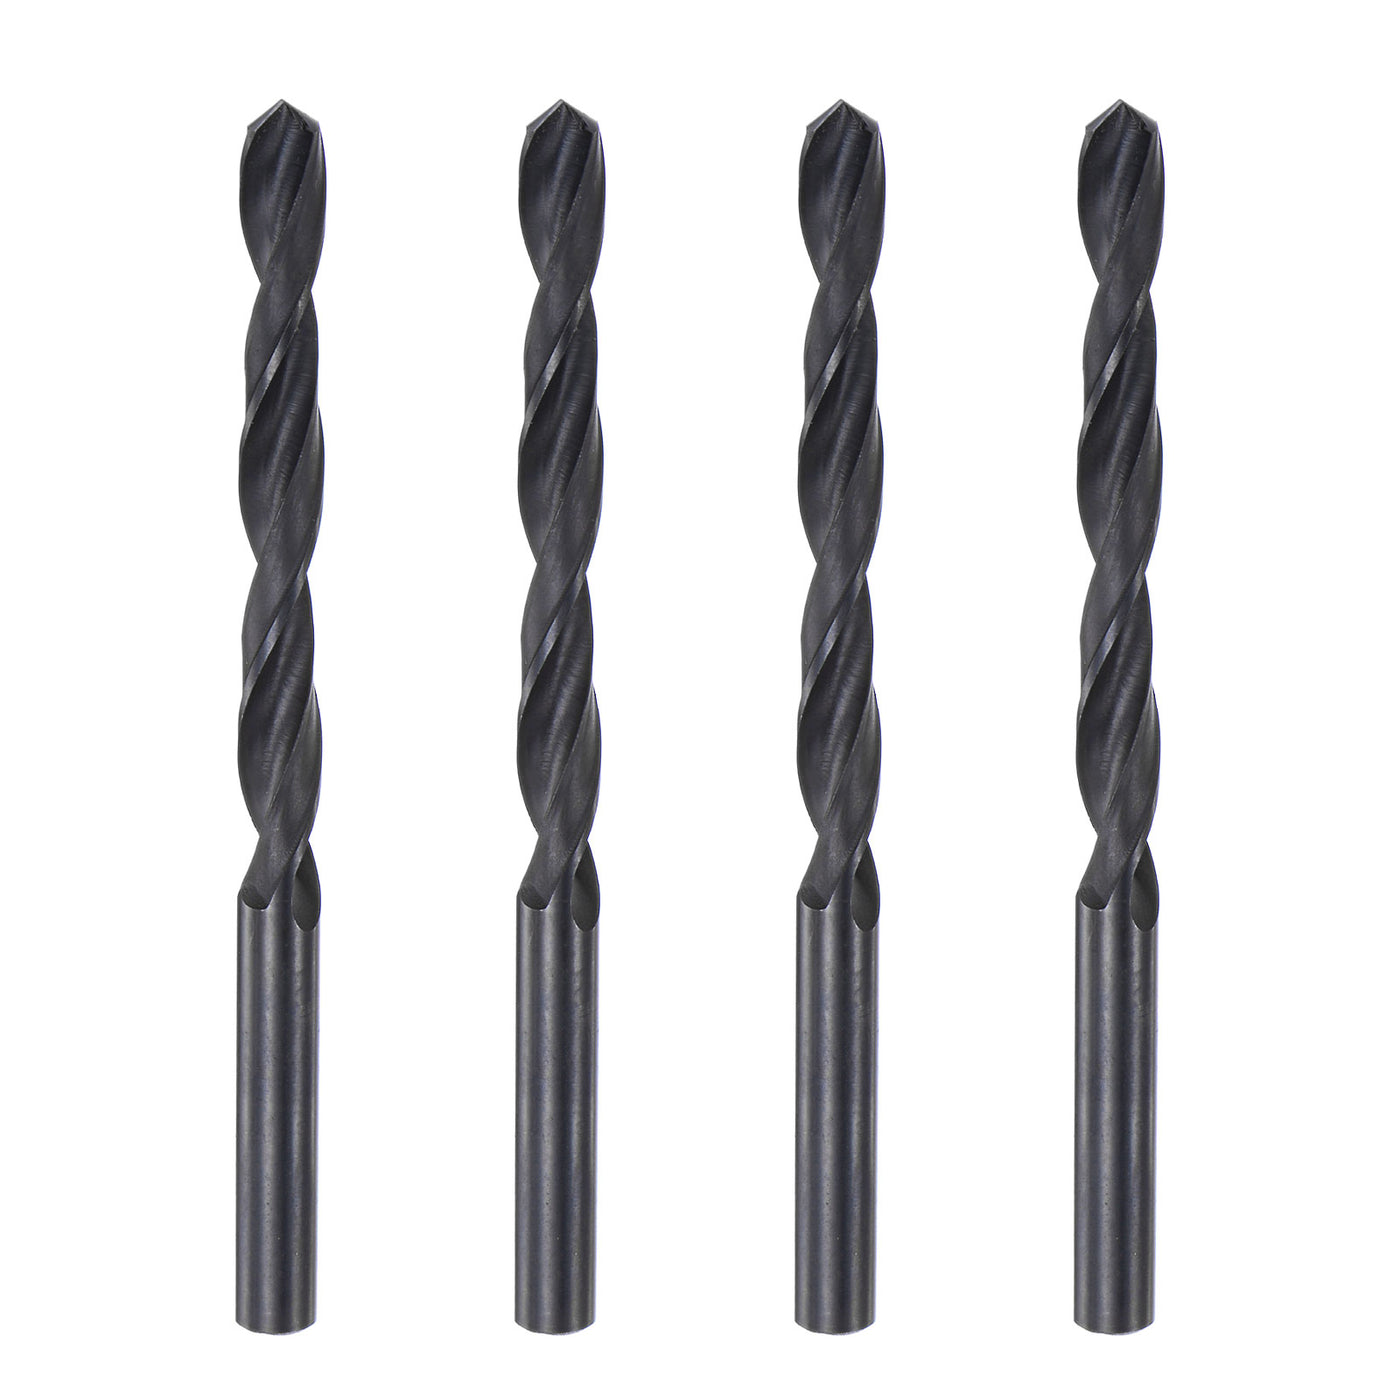 uxcell Uxcell High Speed Steel Twist Drill Bit, 7.4mm Fully Ground Black Oxide 108mm Long 4Pcs